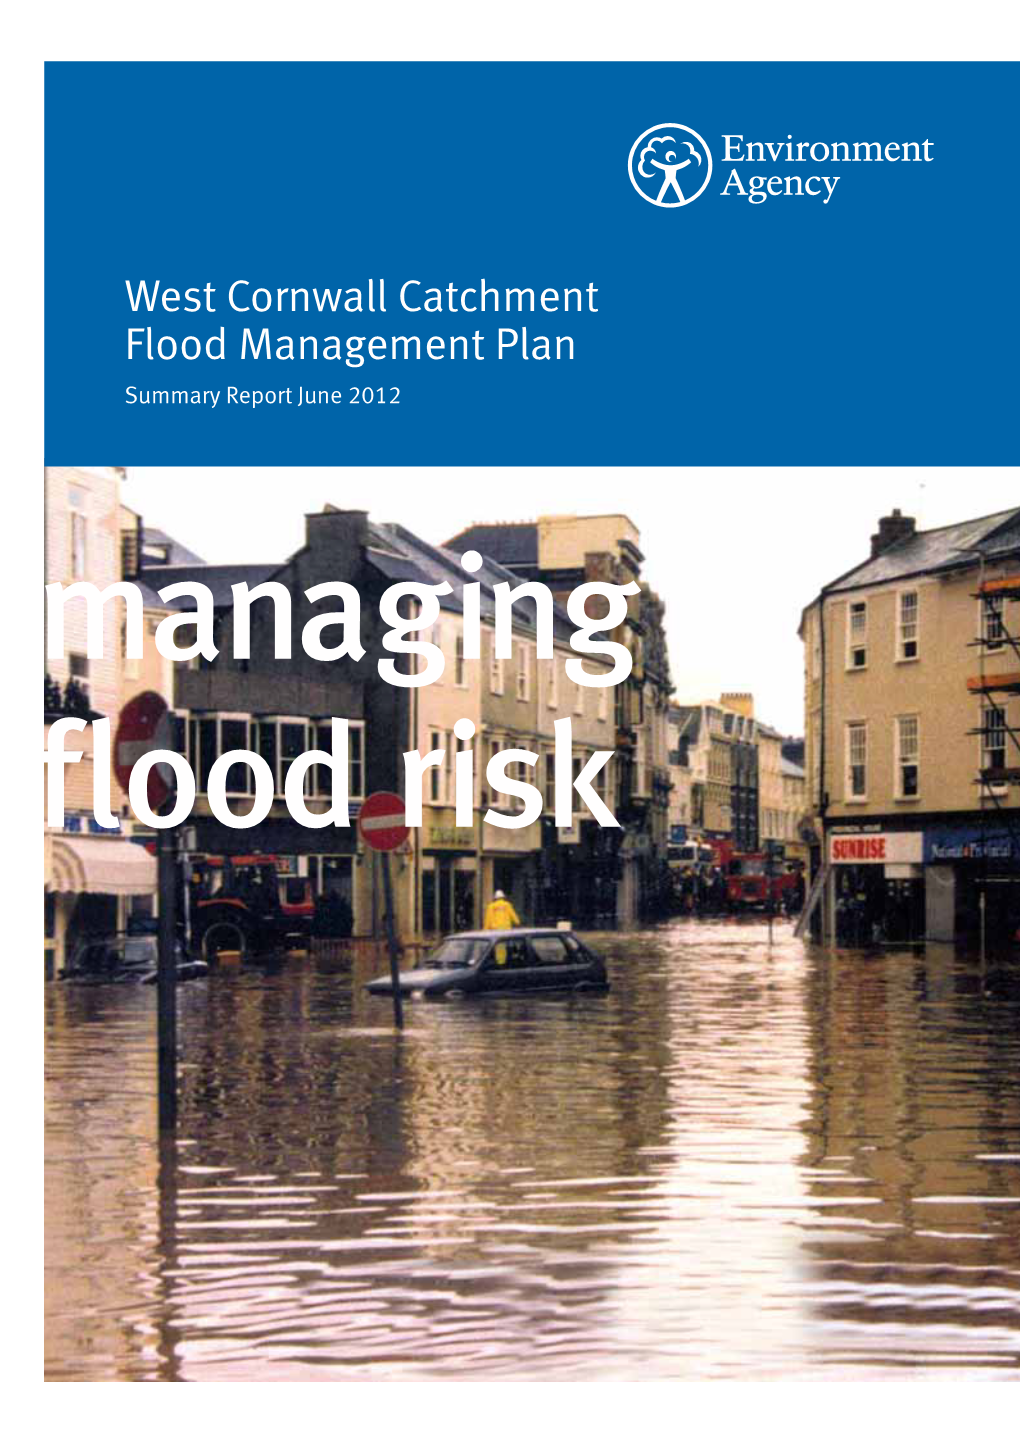 West Cornwall Catchment Flood Management Plan Summary Report June 2012 Managing Flood Risk We Are the Environment Agency